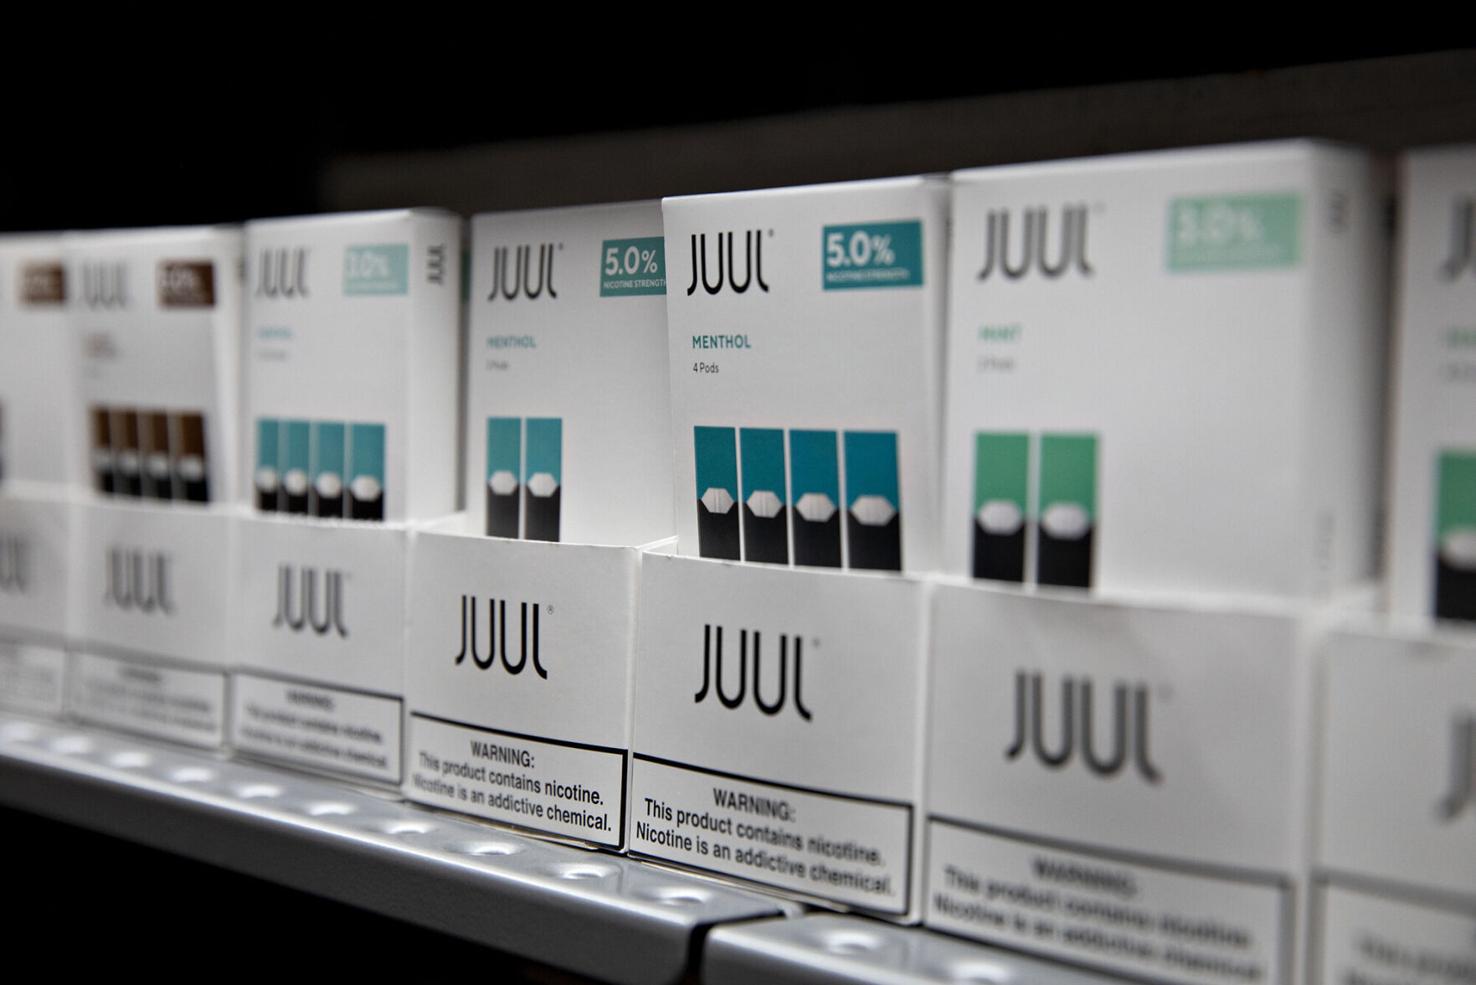 Juul vape pens could be pulled from US shelves. Altria shares tumble ...